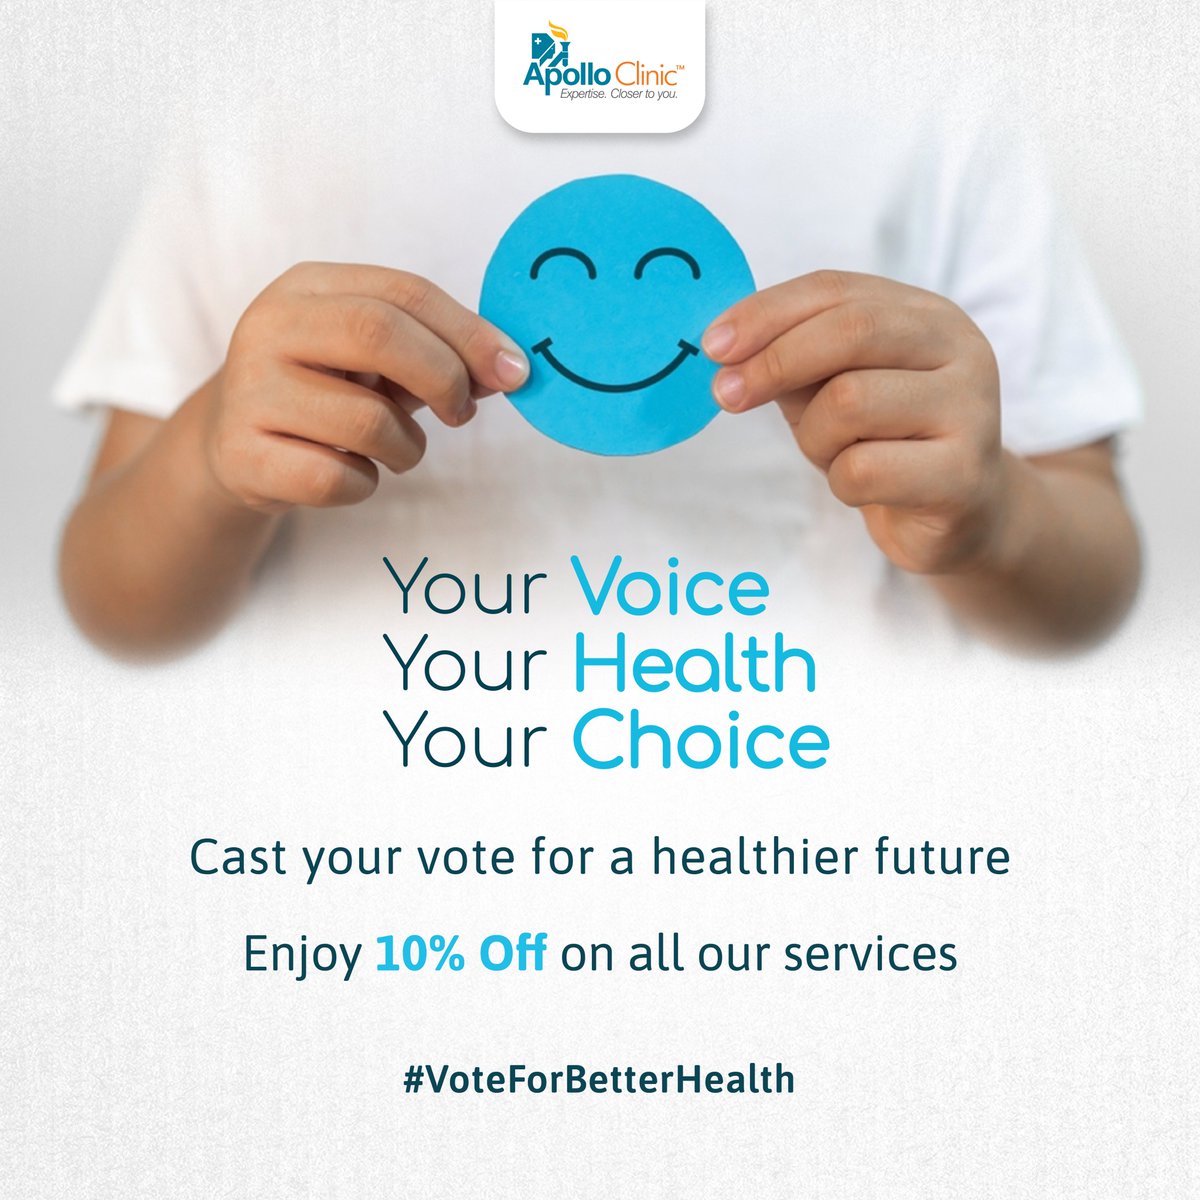 Every ballot counts towards a brighter, healthier future for all. Vote and empower your health with your voice. Avail 10% off on all our services and Urge your friends and family to #VoteForBetterHealth

#VoteForBetterHealth #EveryBallotCounts #EmpowerYourHealth #HealthIsAVote